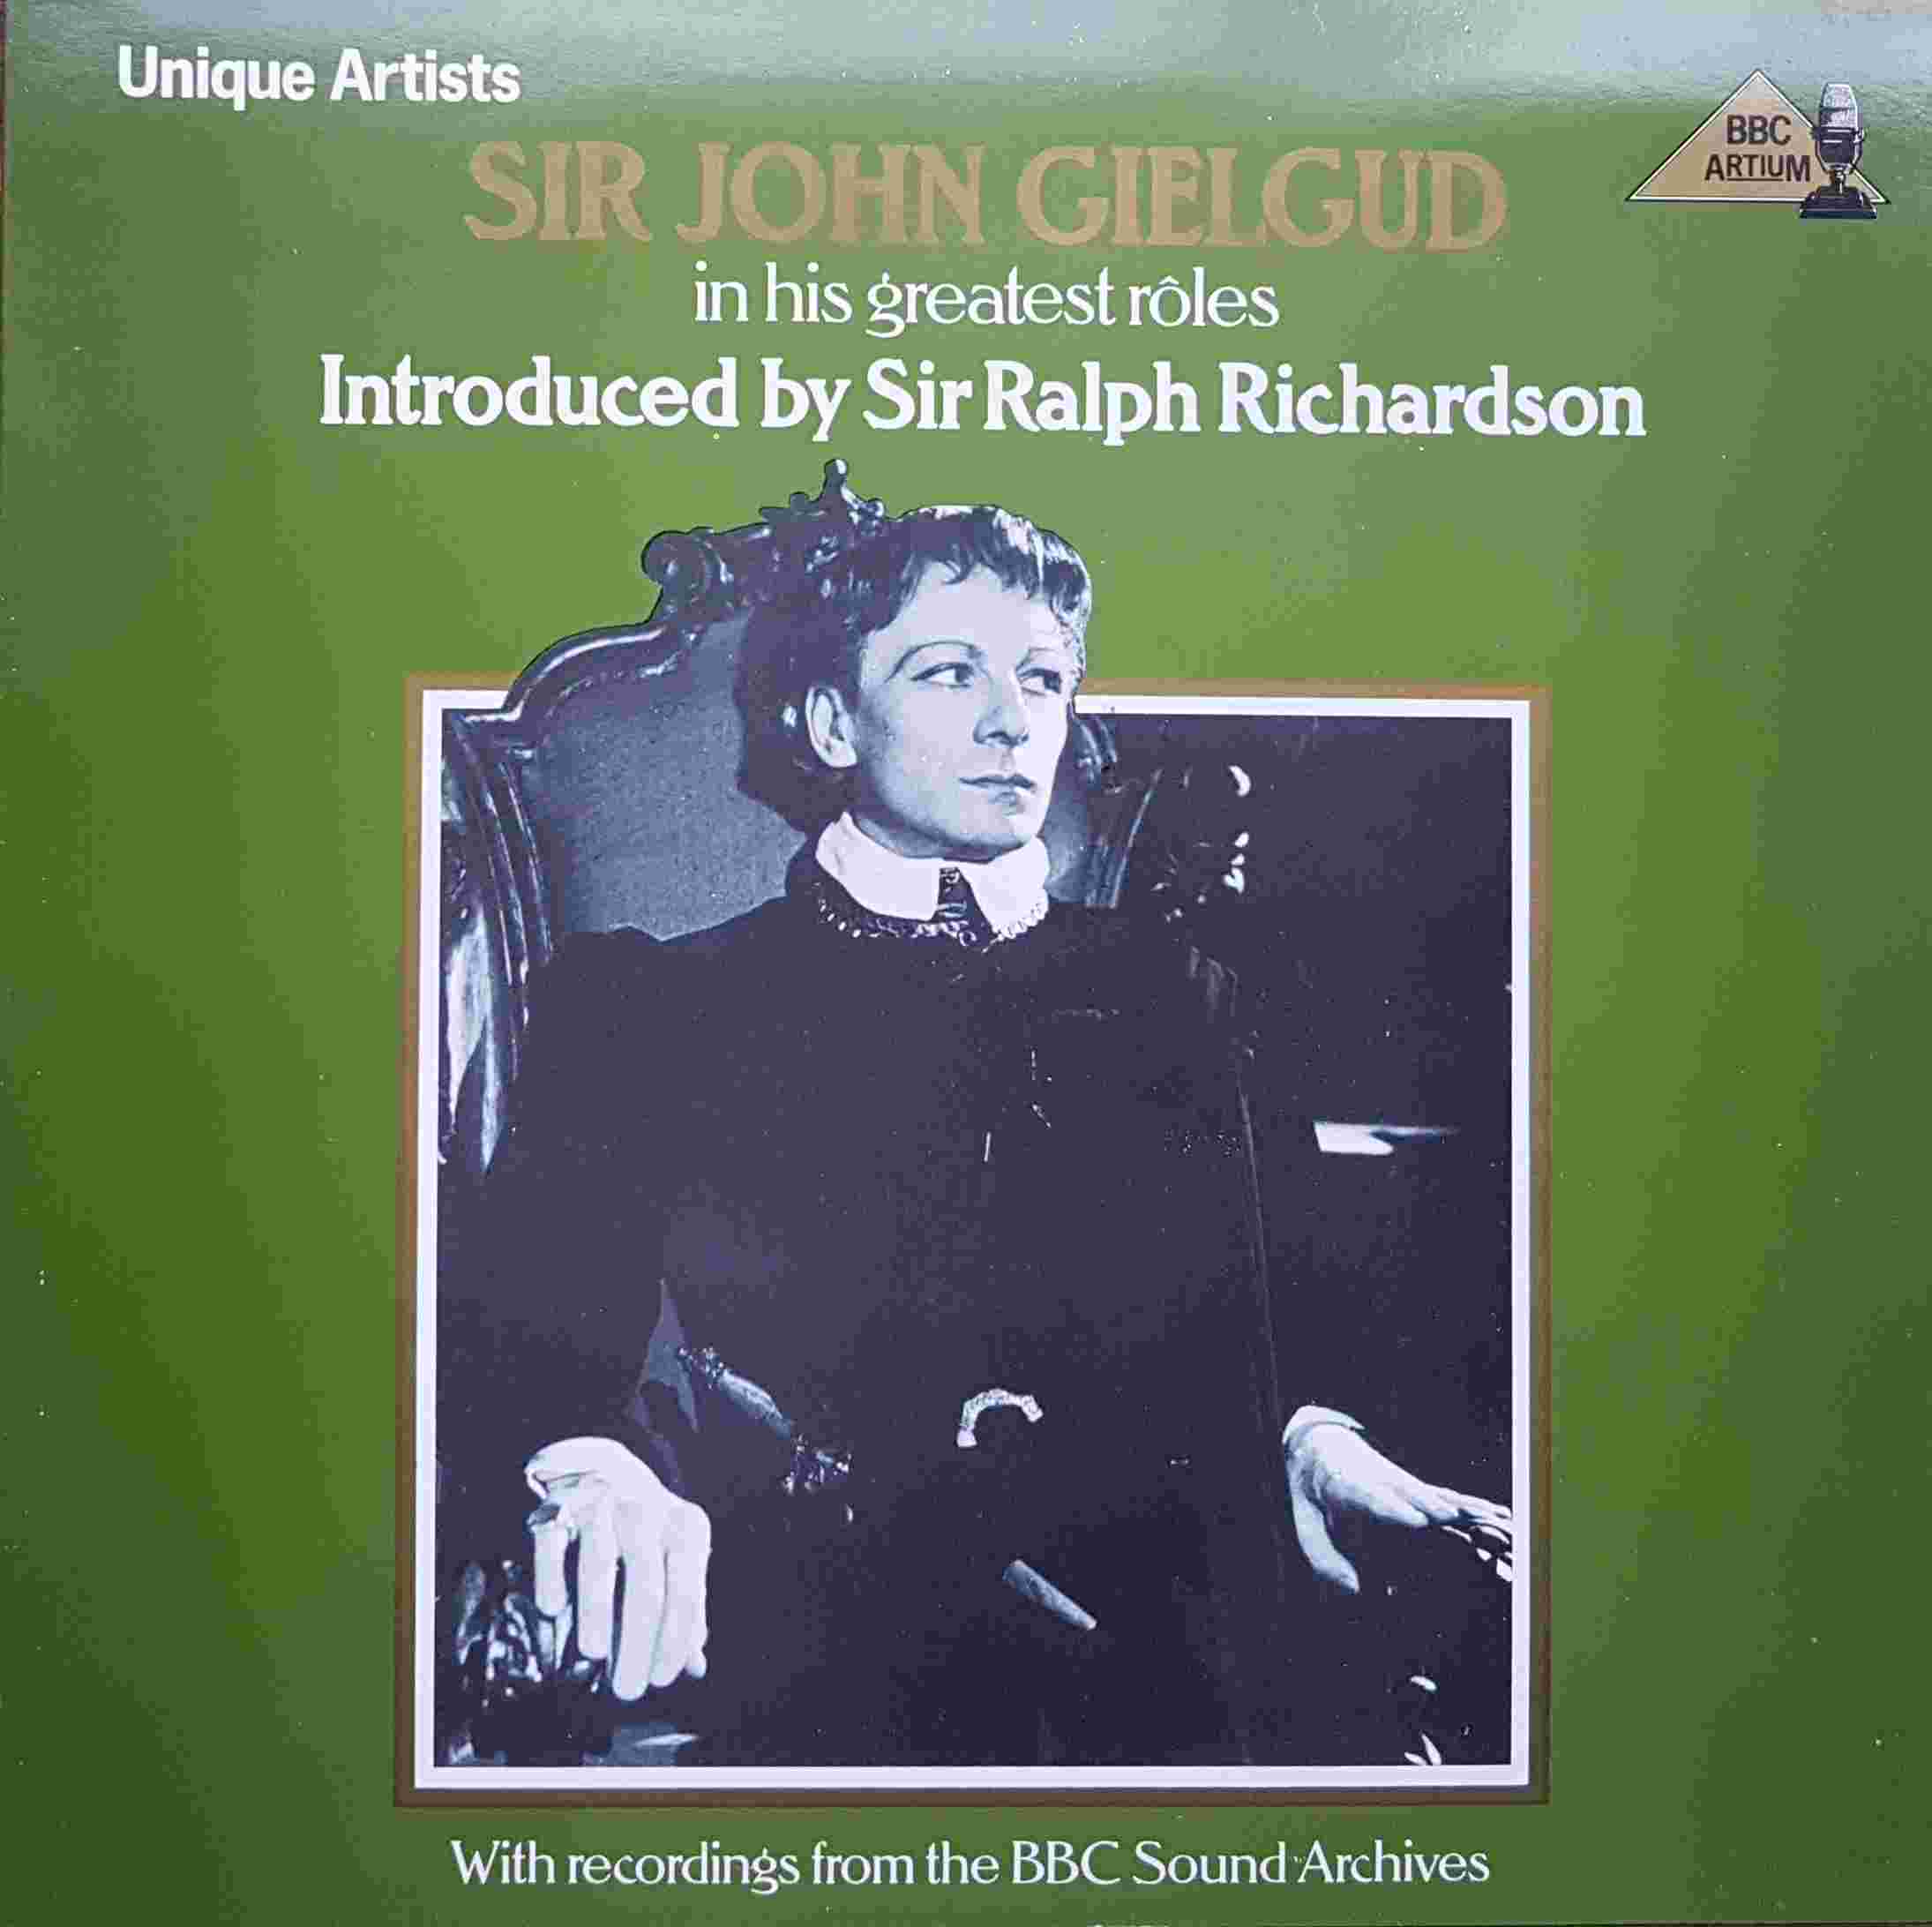 Picture of REGL 351 Sir John Gielgud in his greatest roles by artist Sir John Gielgud from the BBC albums - Records and Tapes library